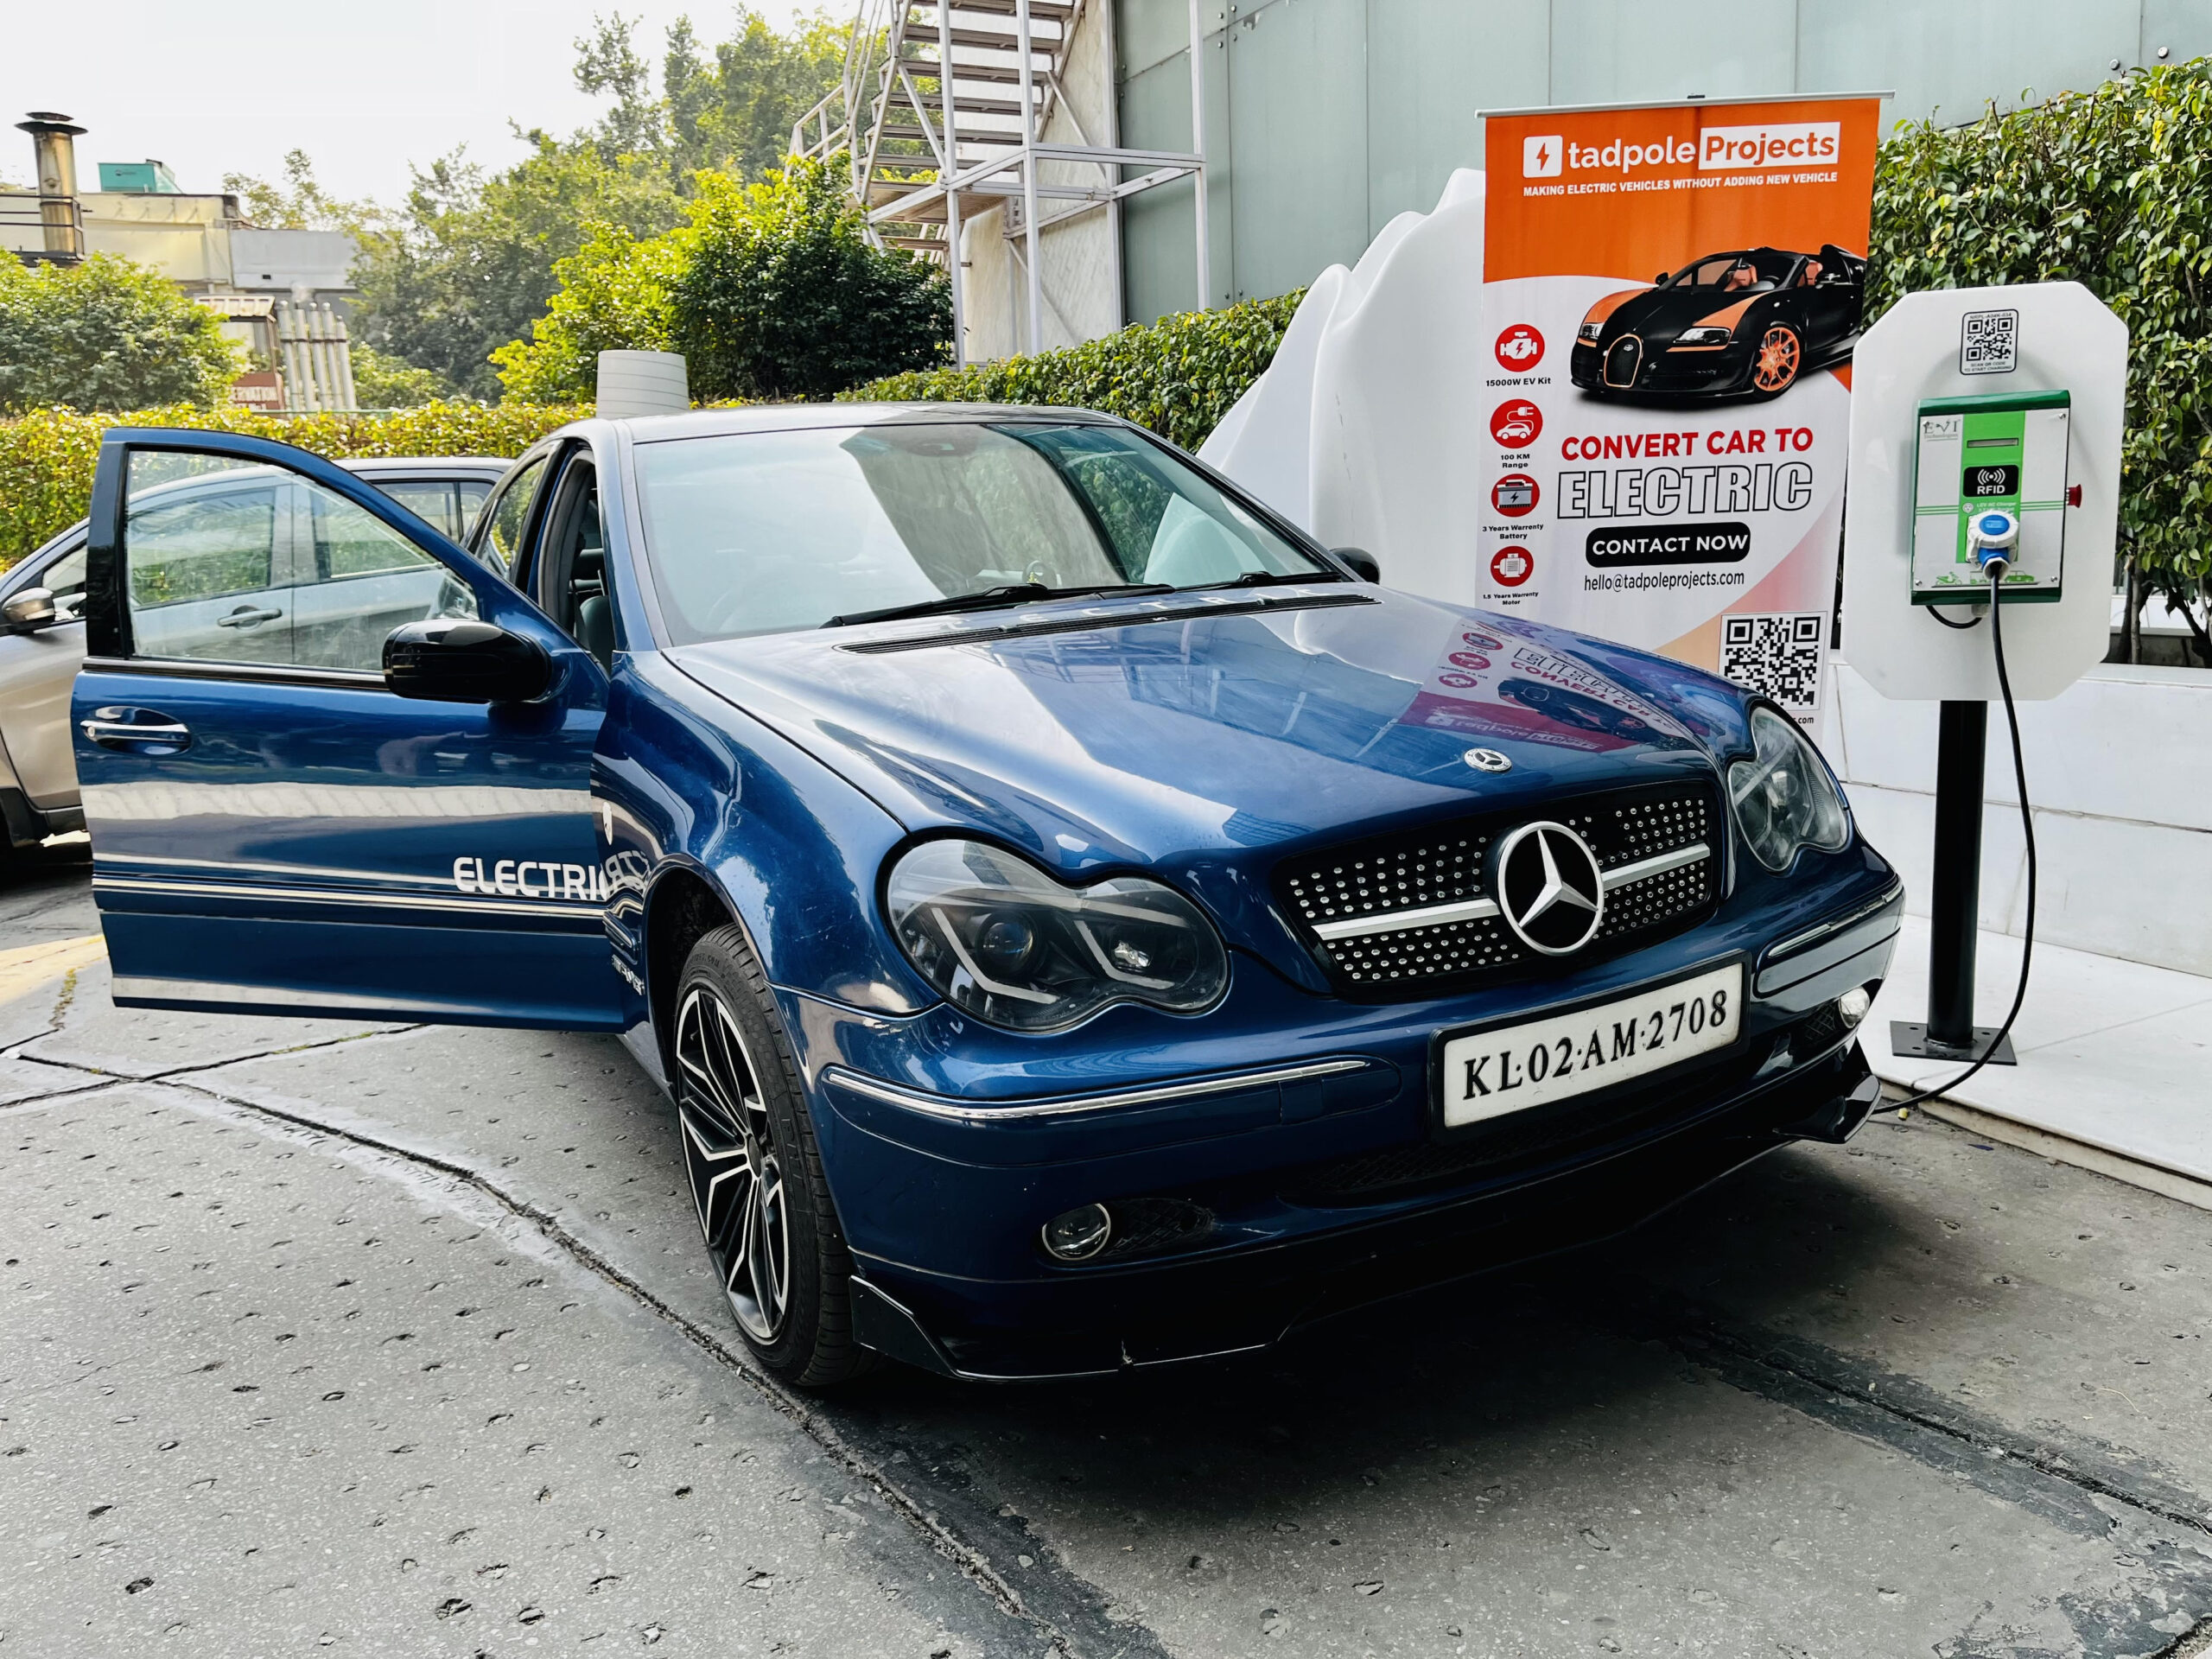 Mercedes C-Class Petrol Converted Into Electric By Tadpole Projects (2)